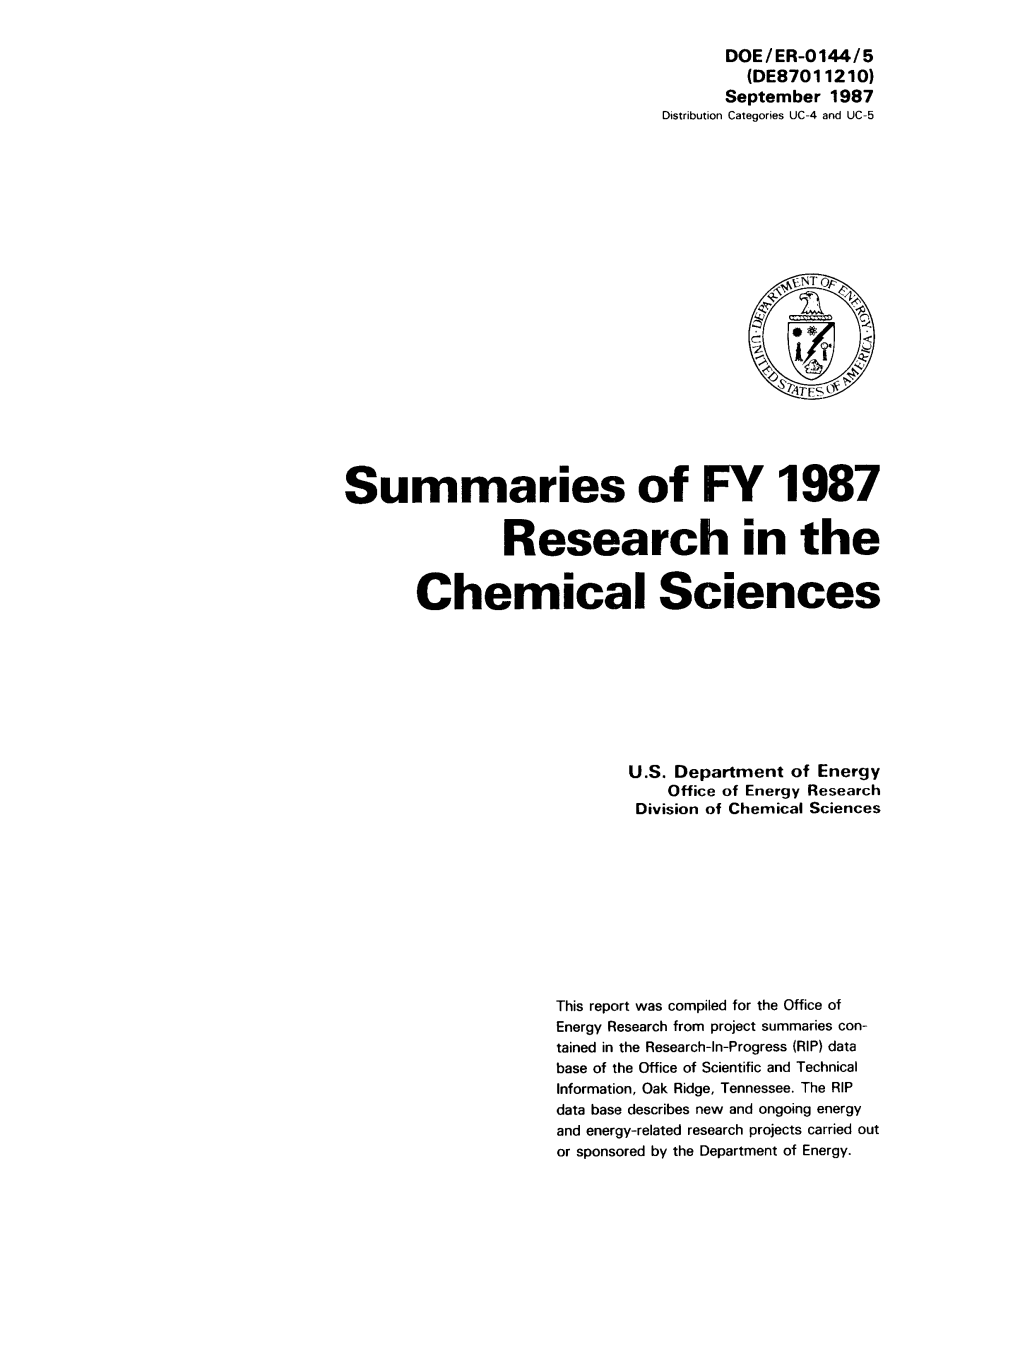 Summaries of FY 1987 Research in the Chemical Sciences